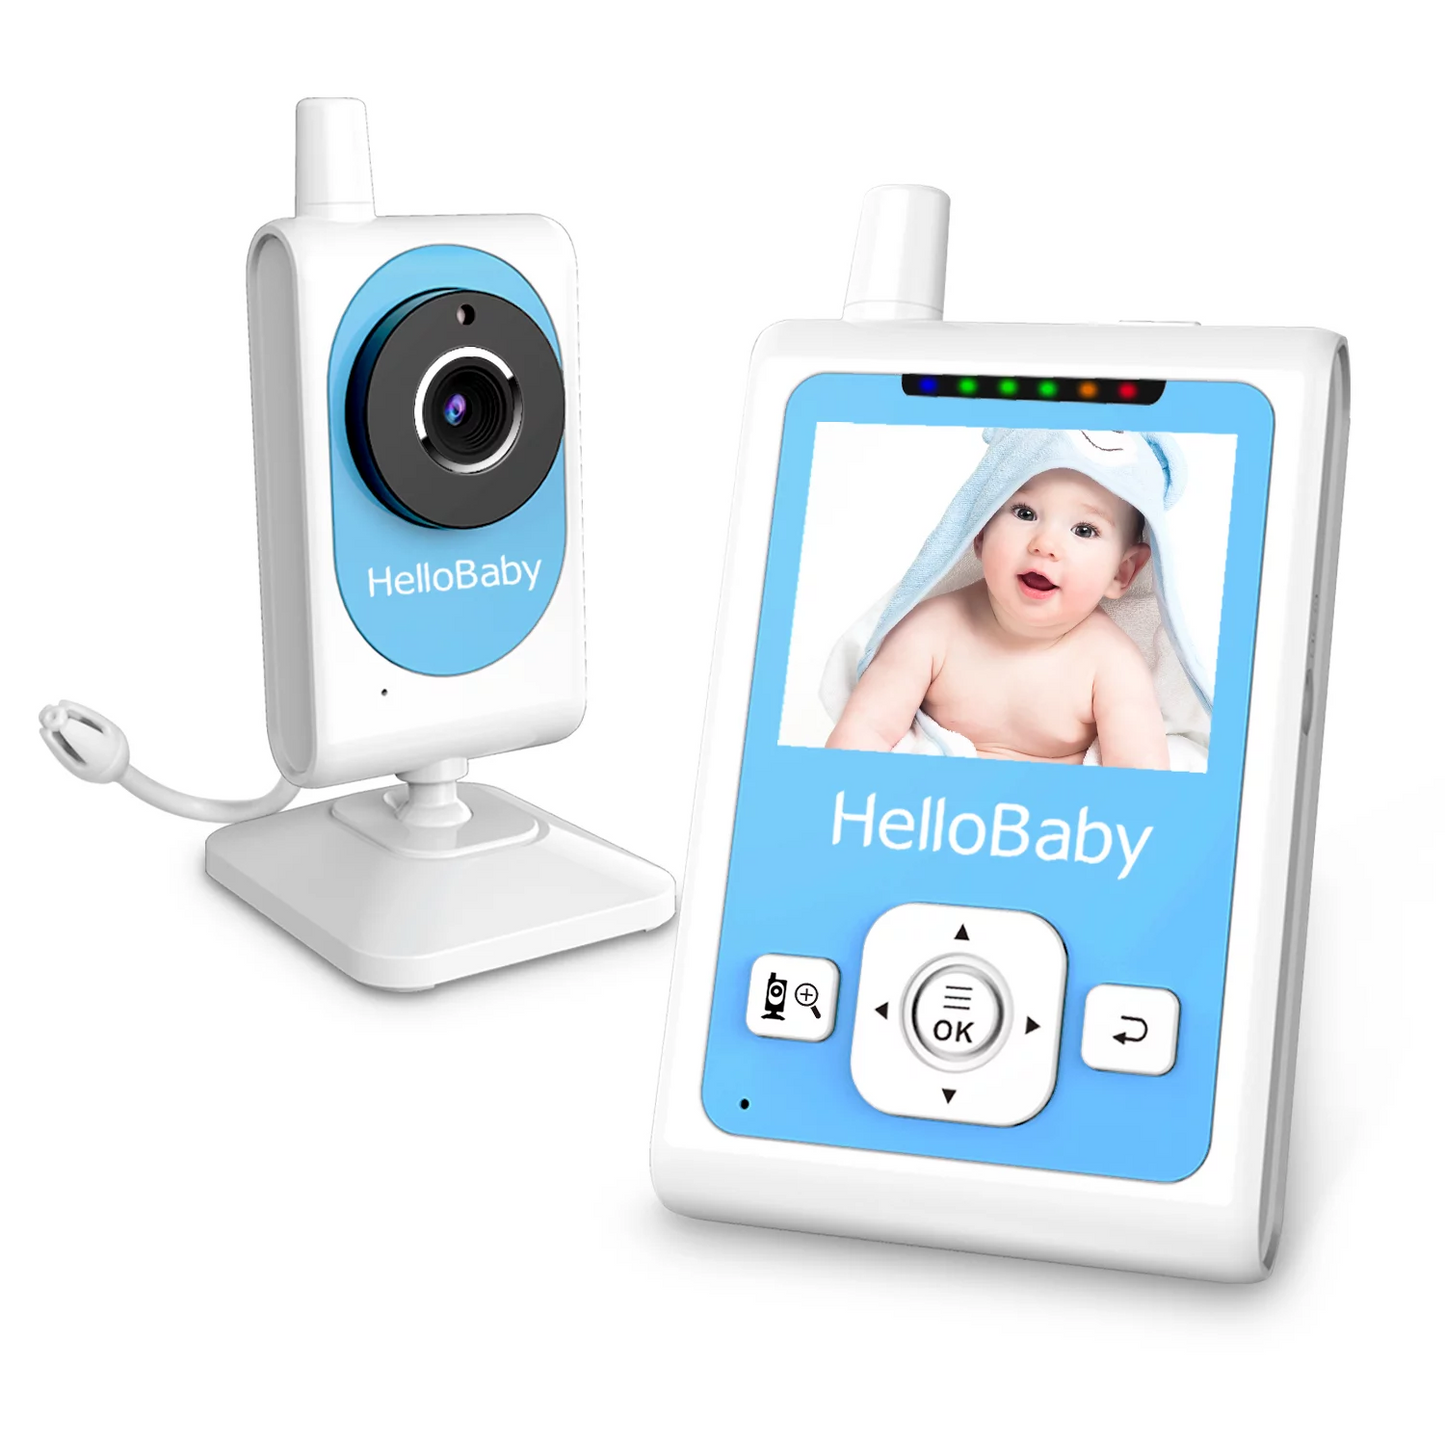 hellobaby best baby monitor - Baby Monitor HelloBaby Video Baby Monitor with 2.4 inch Screen, Night Vision, Temperature Sensor, VOX Mode, One-Way Talk, HB26  